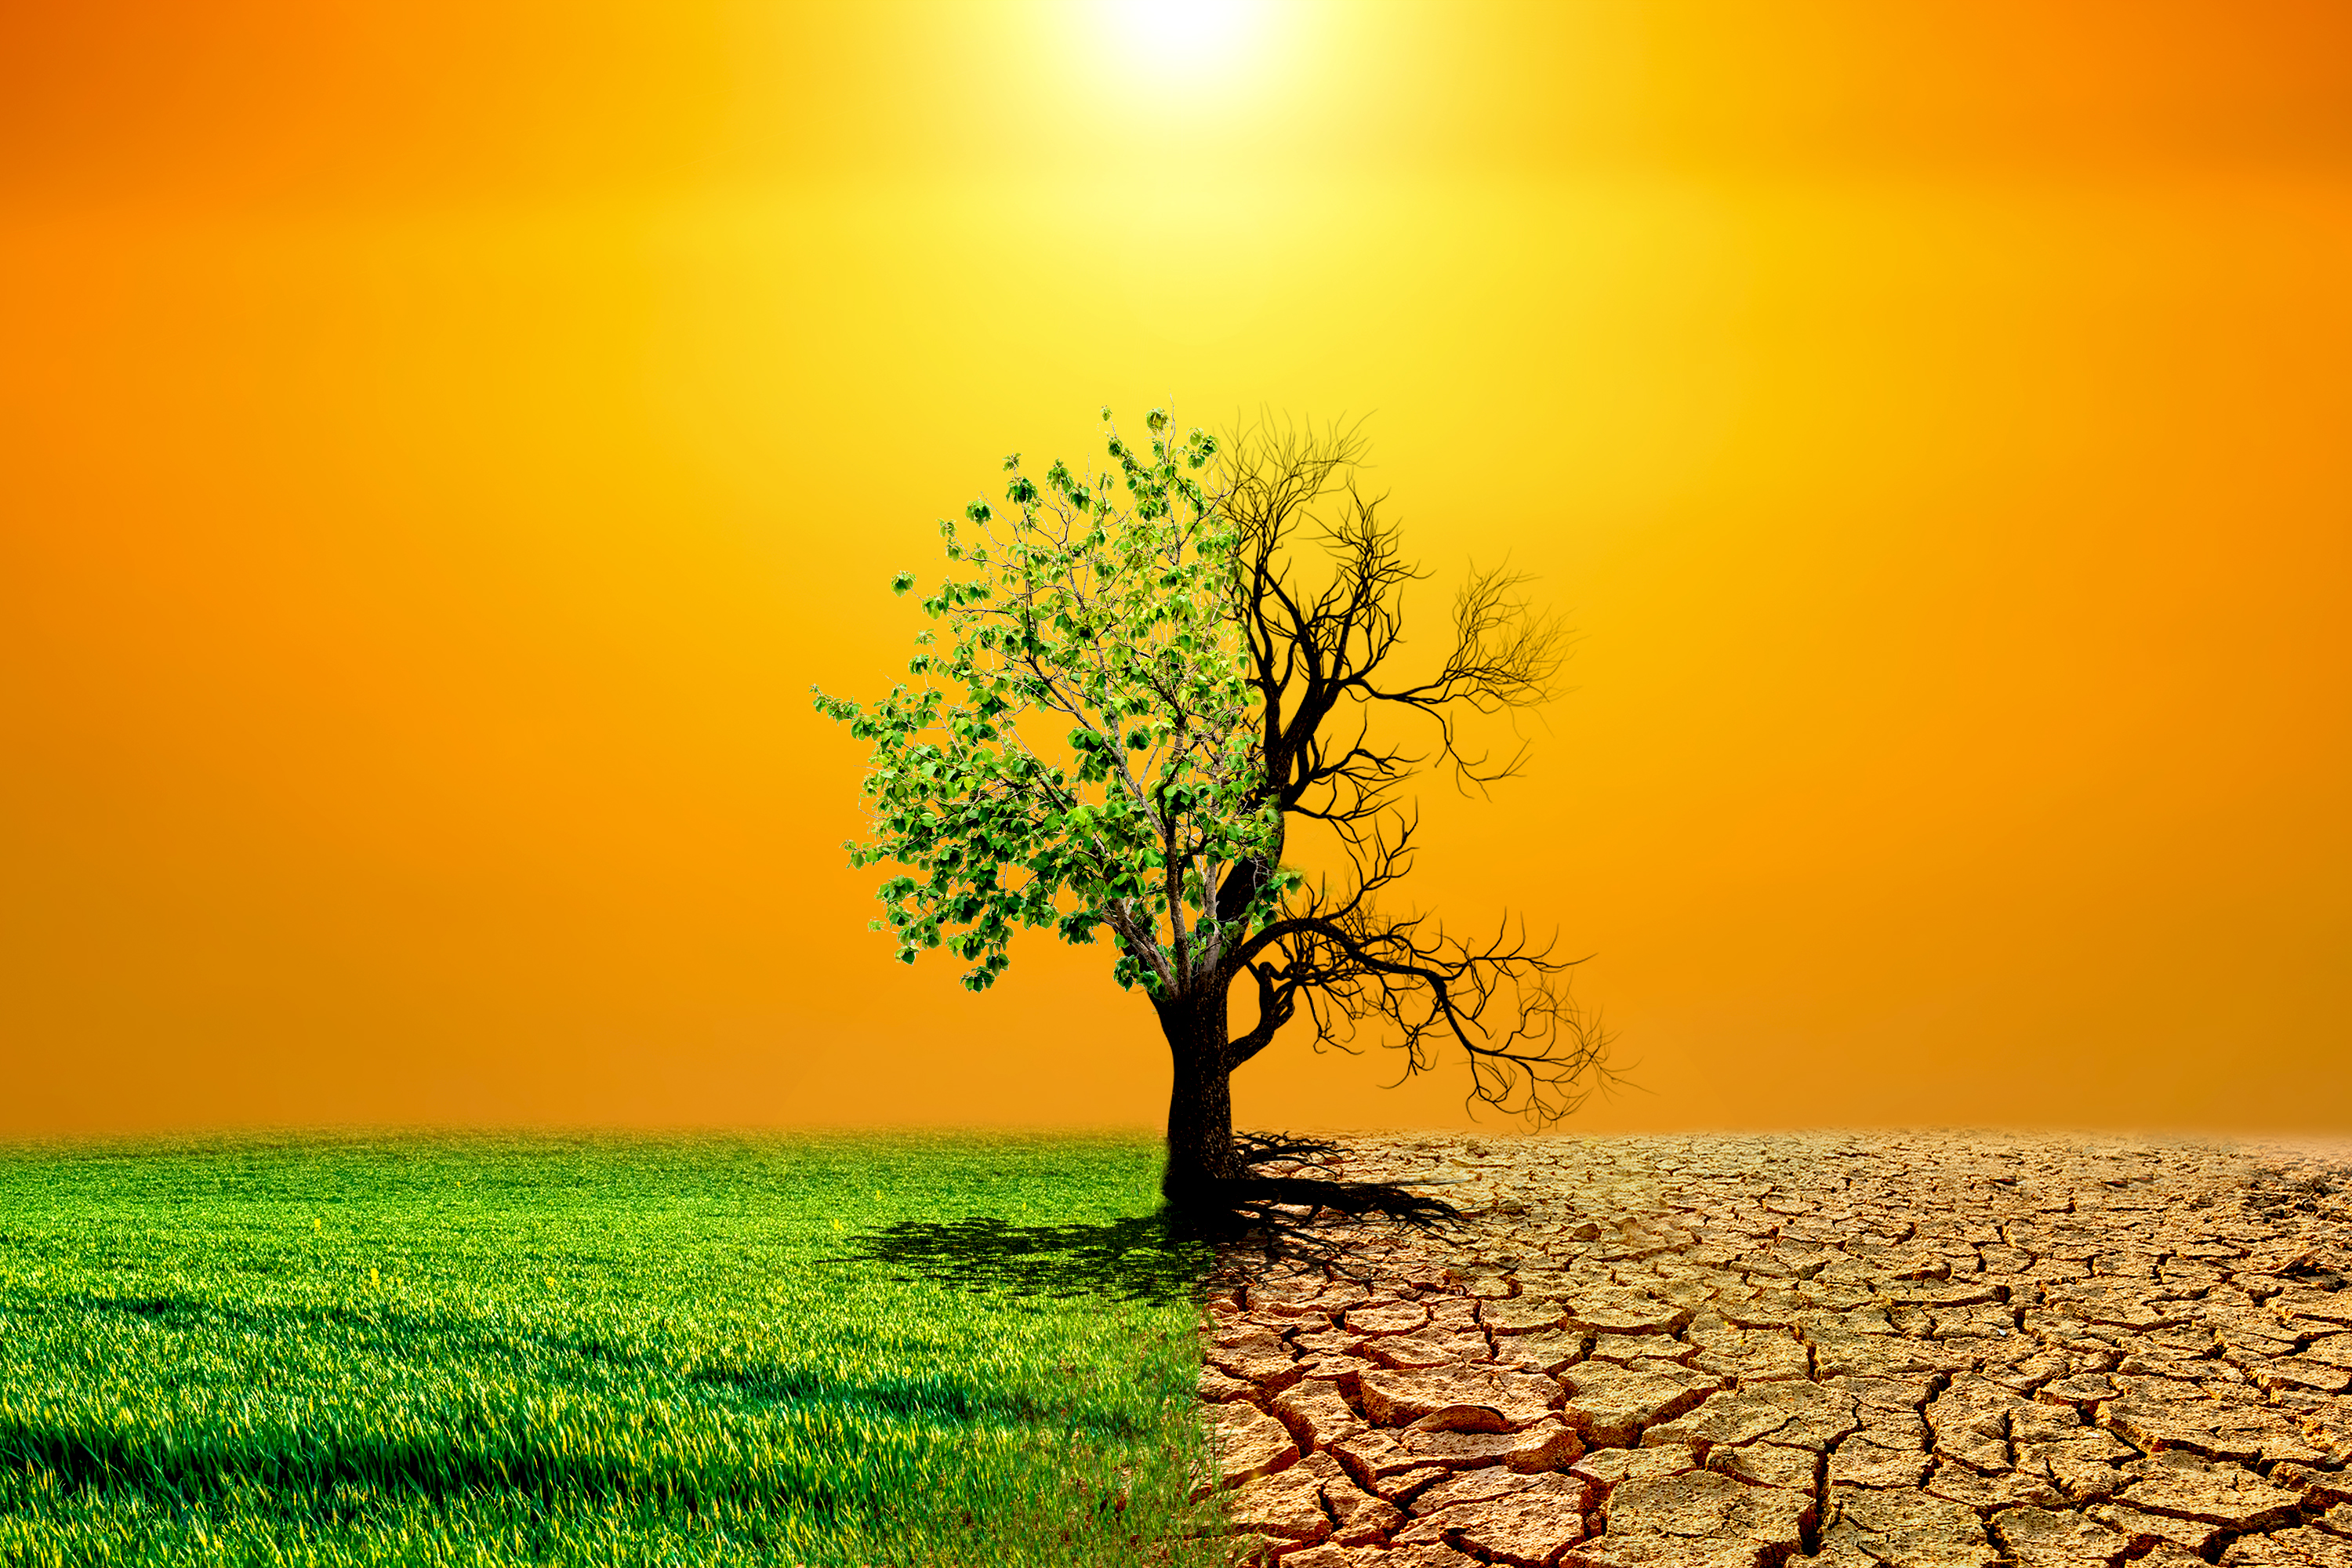 vecteezy global warming concept image showing the effects of dry land 9273868 744